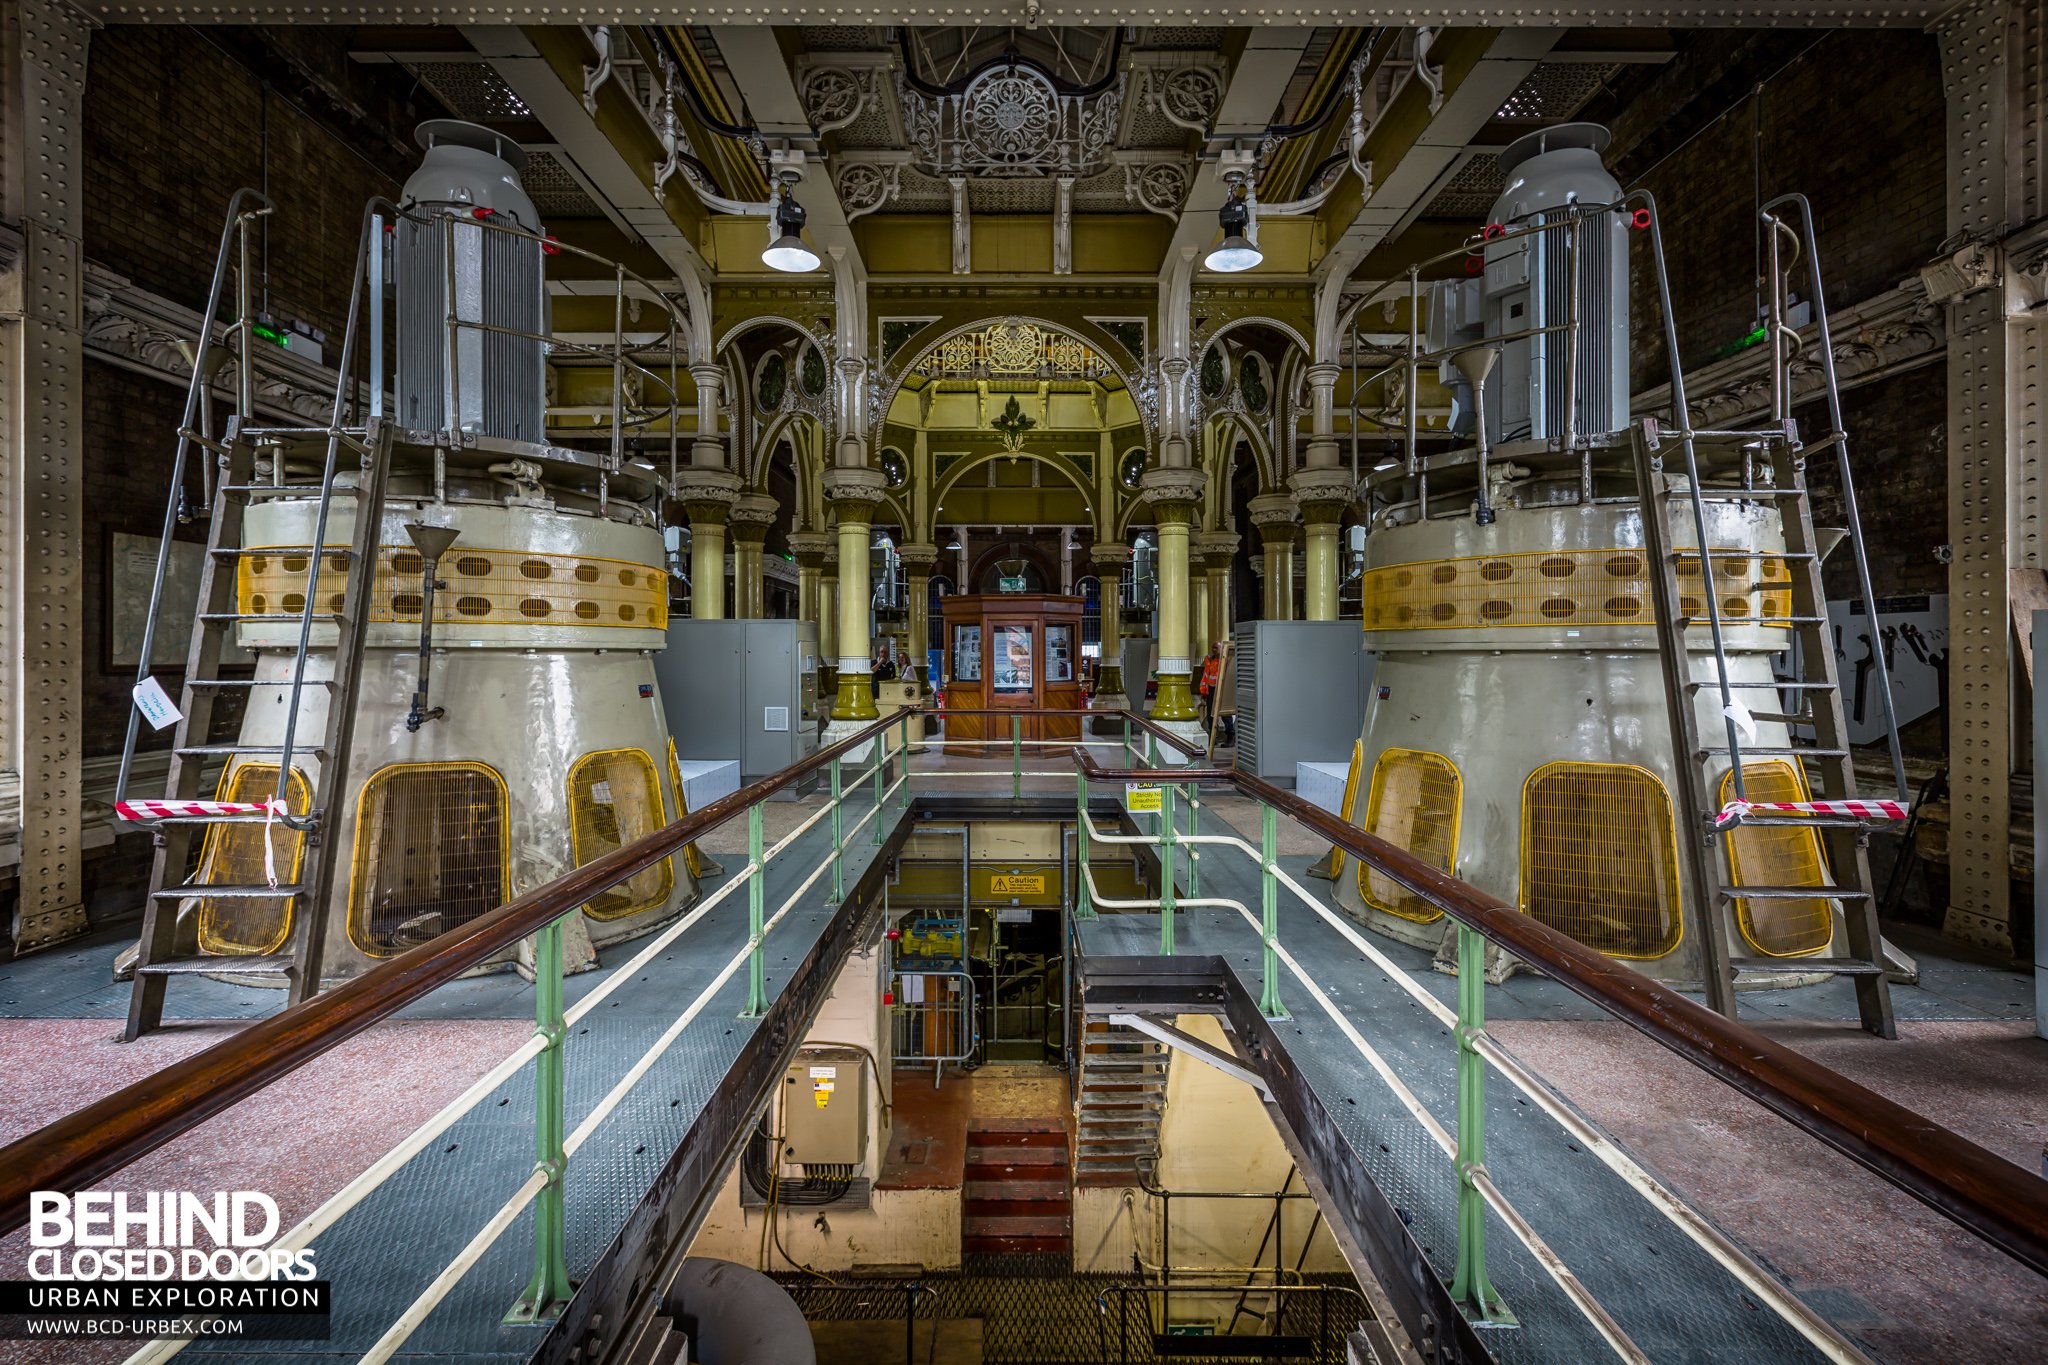 Abbey Mills Pumping Station, London, UK » Urbex | Behind Closed ...